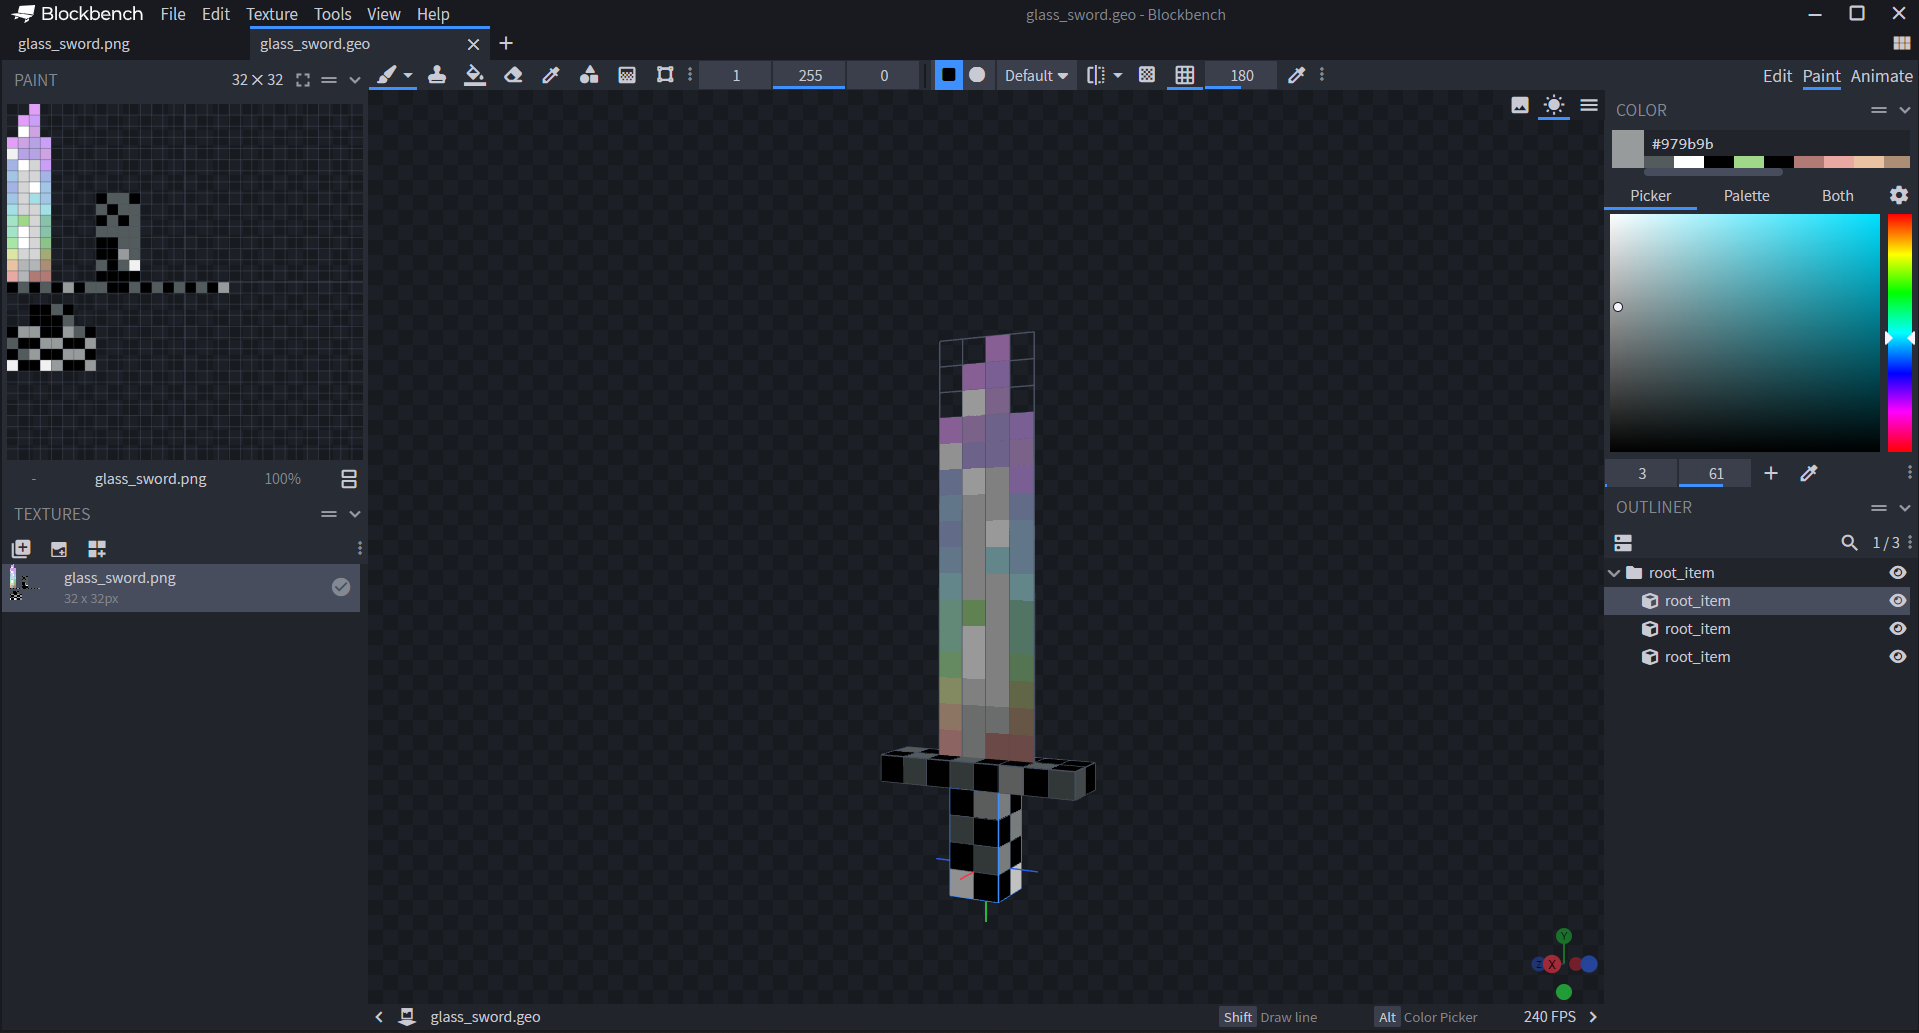 Image of a sword model edited to look like a rainbow prism.